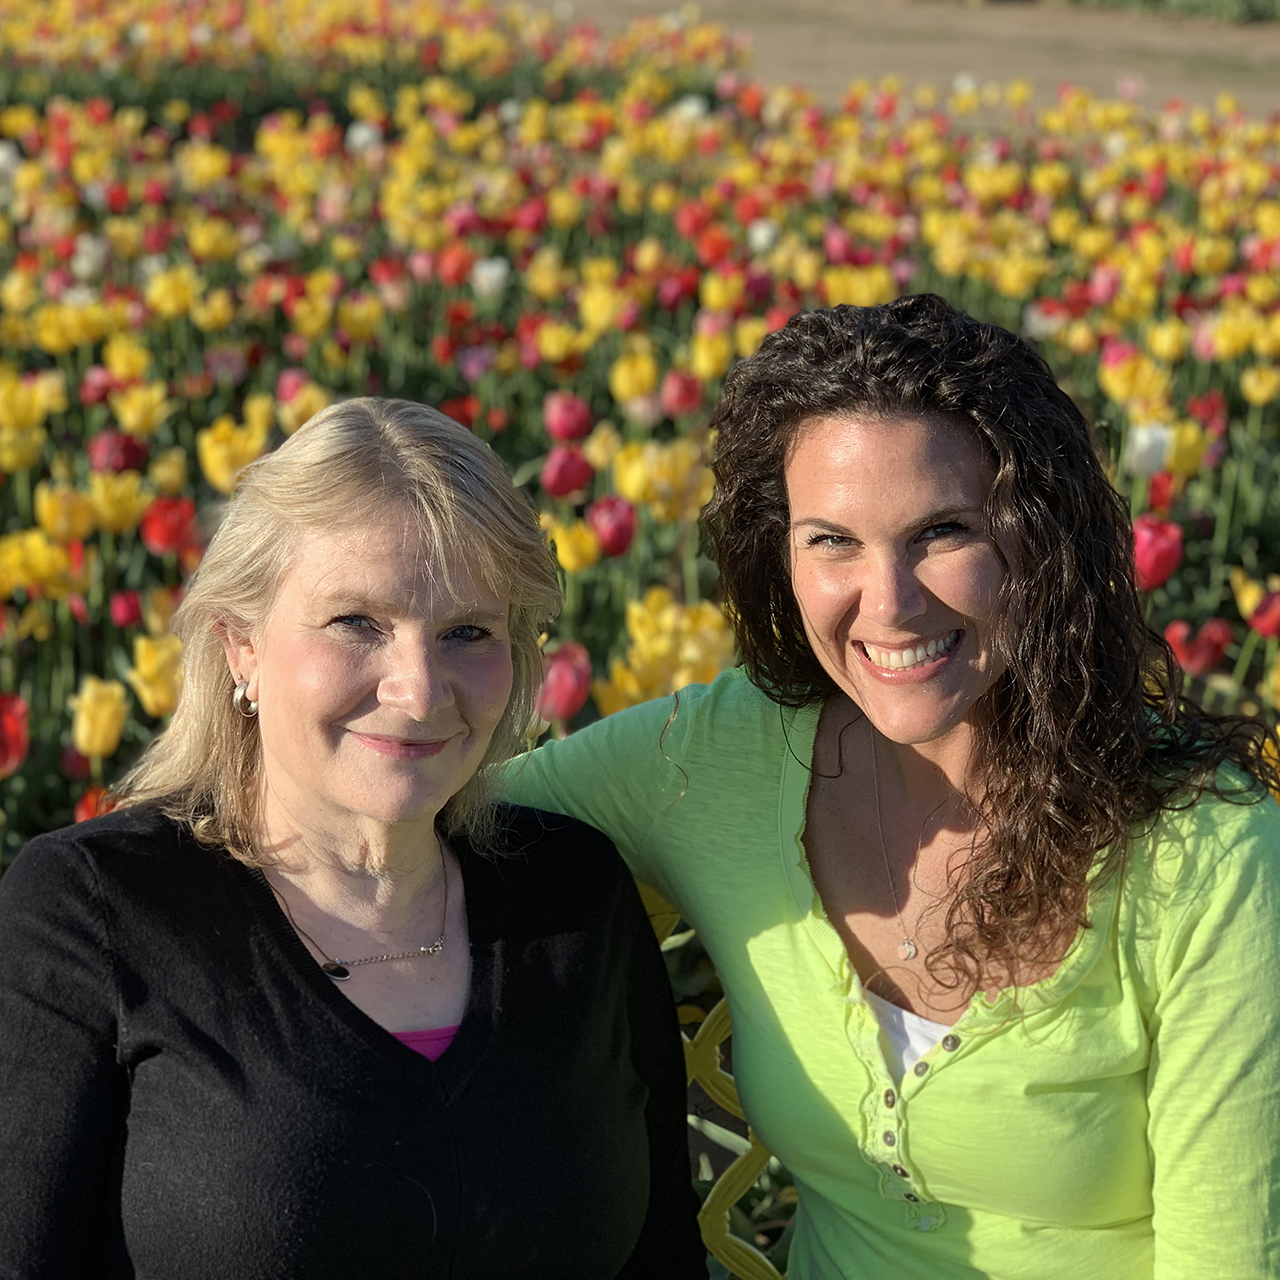 Angie Normie sitting with her aunt Brenda in front of a field of yellow and red tulips.